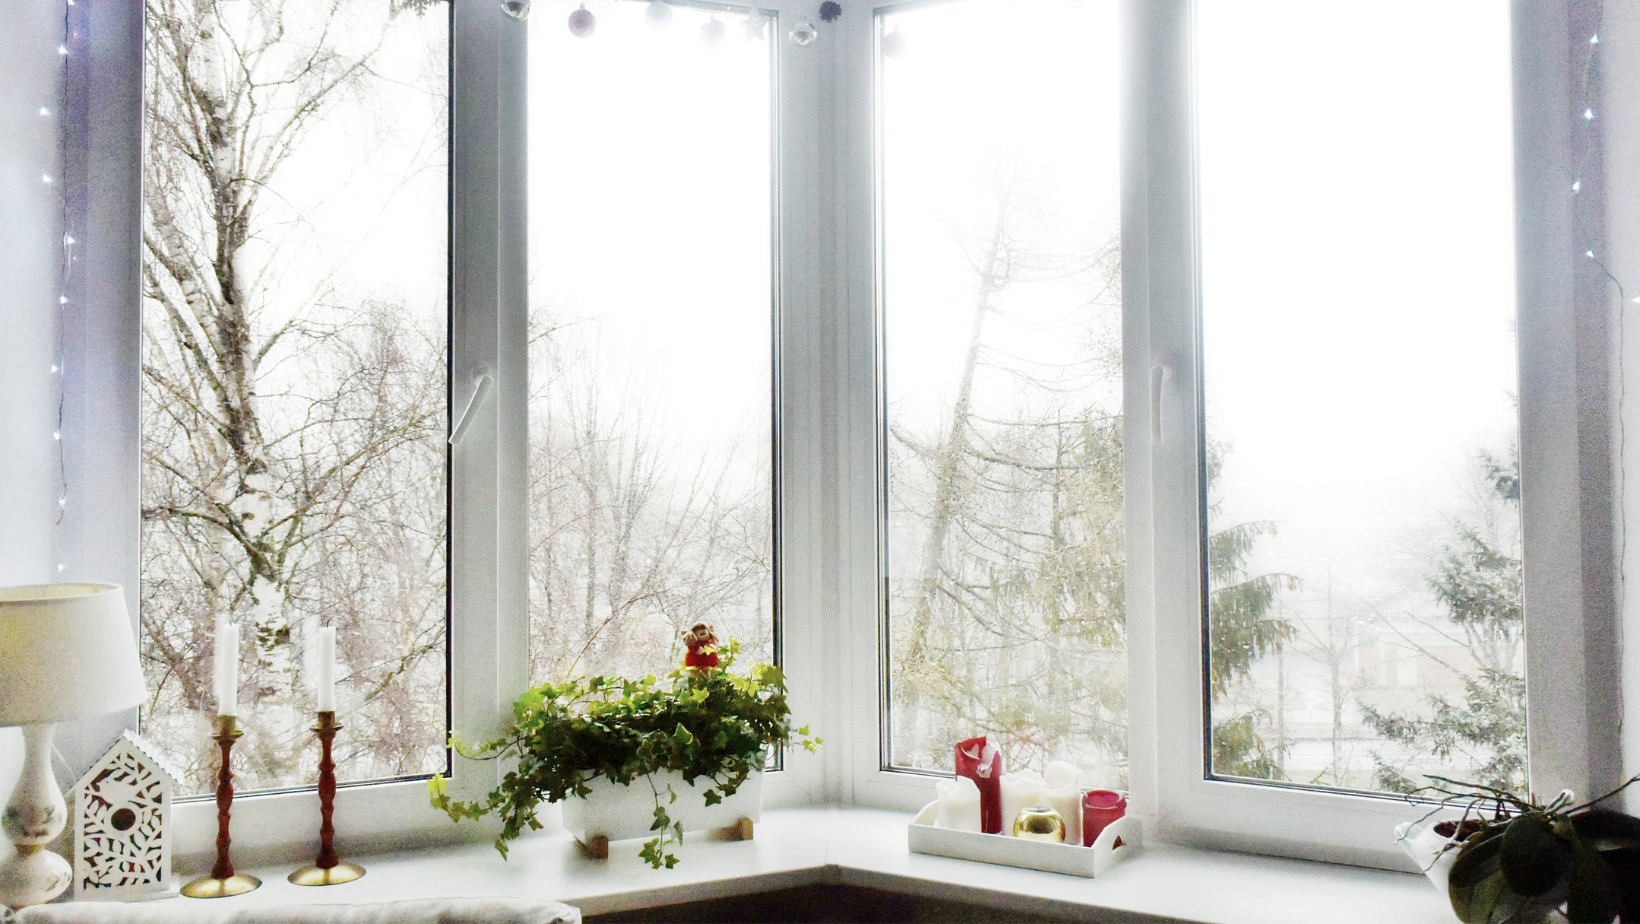 Large windows looking out onto a snowy Vermont landscape.